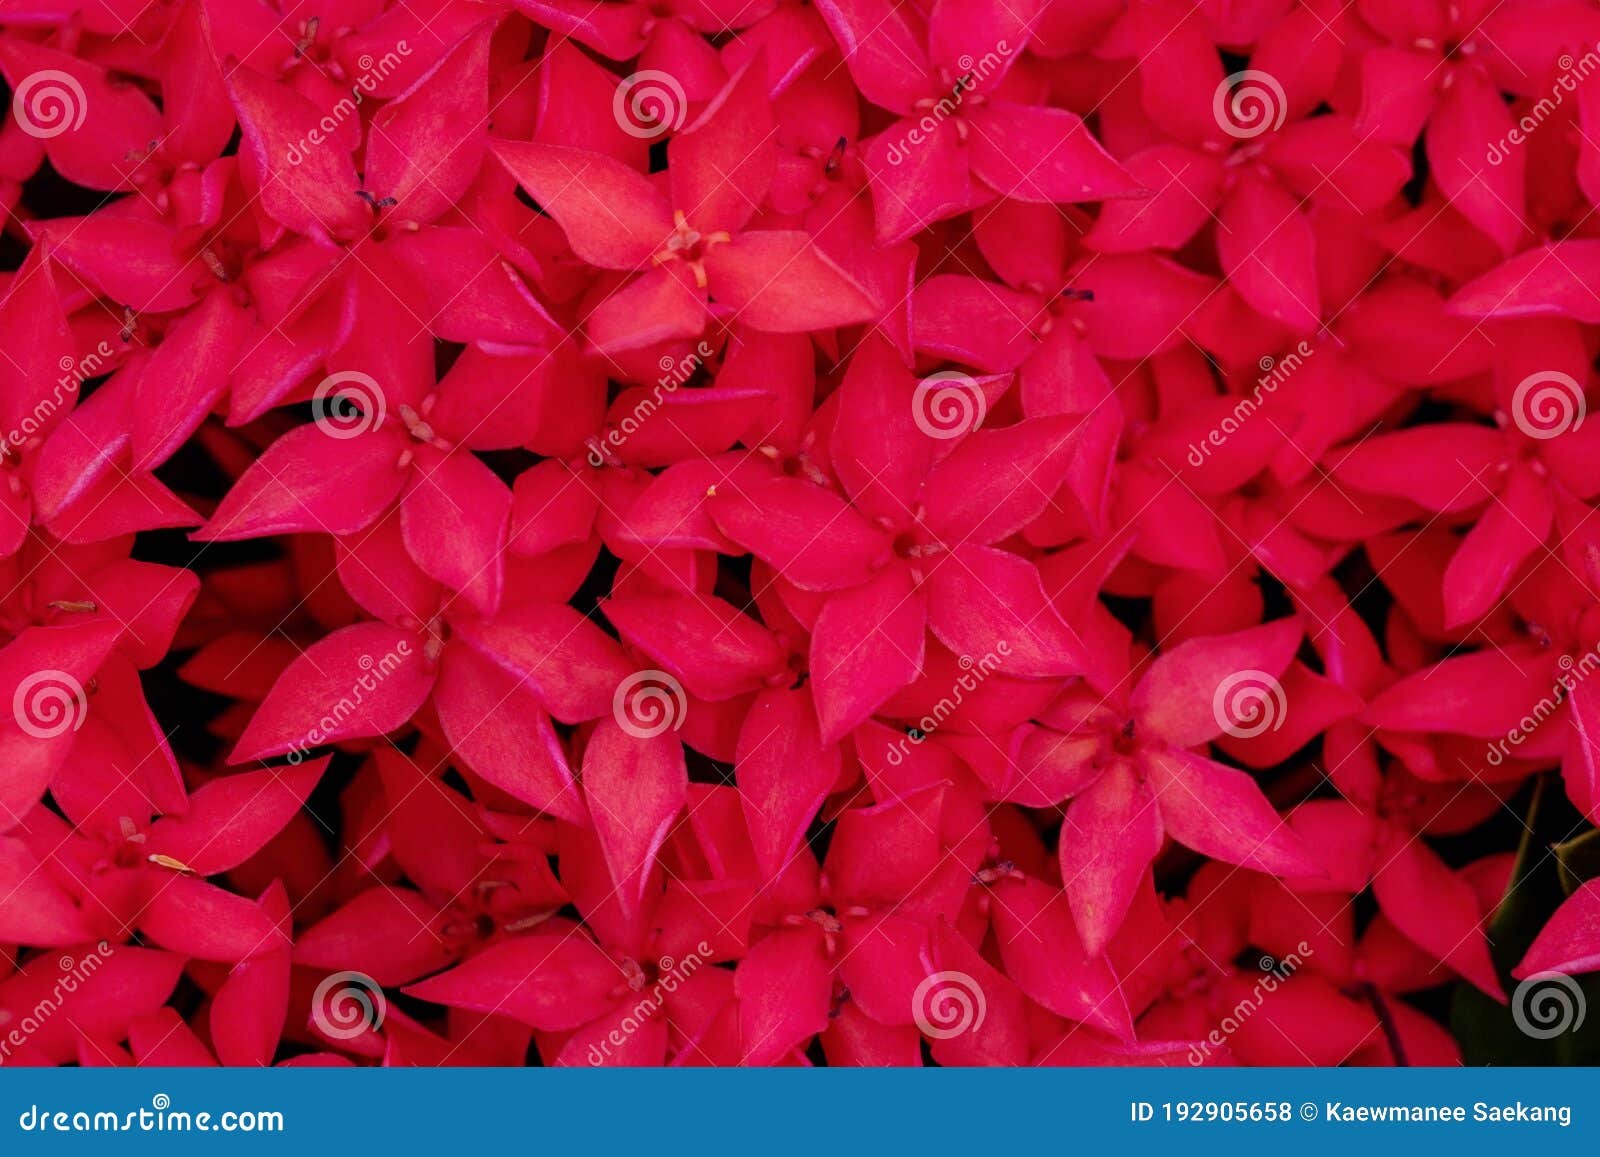 group blossom ixora lobbii loudon flower on natural background. beautiful macro blooming red colorful ixora chinensis